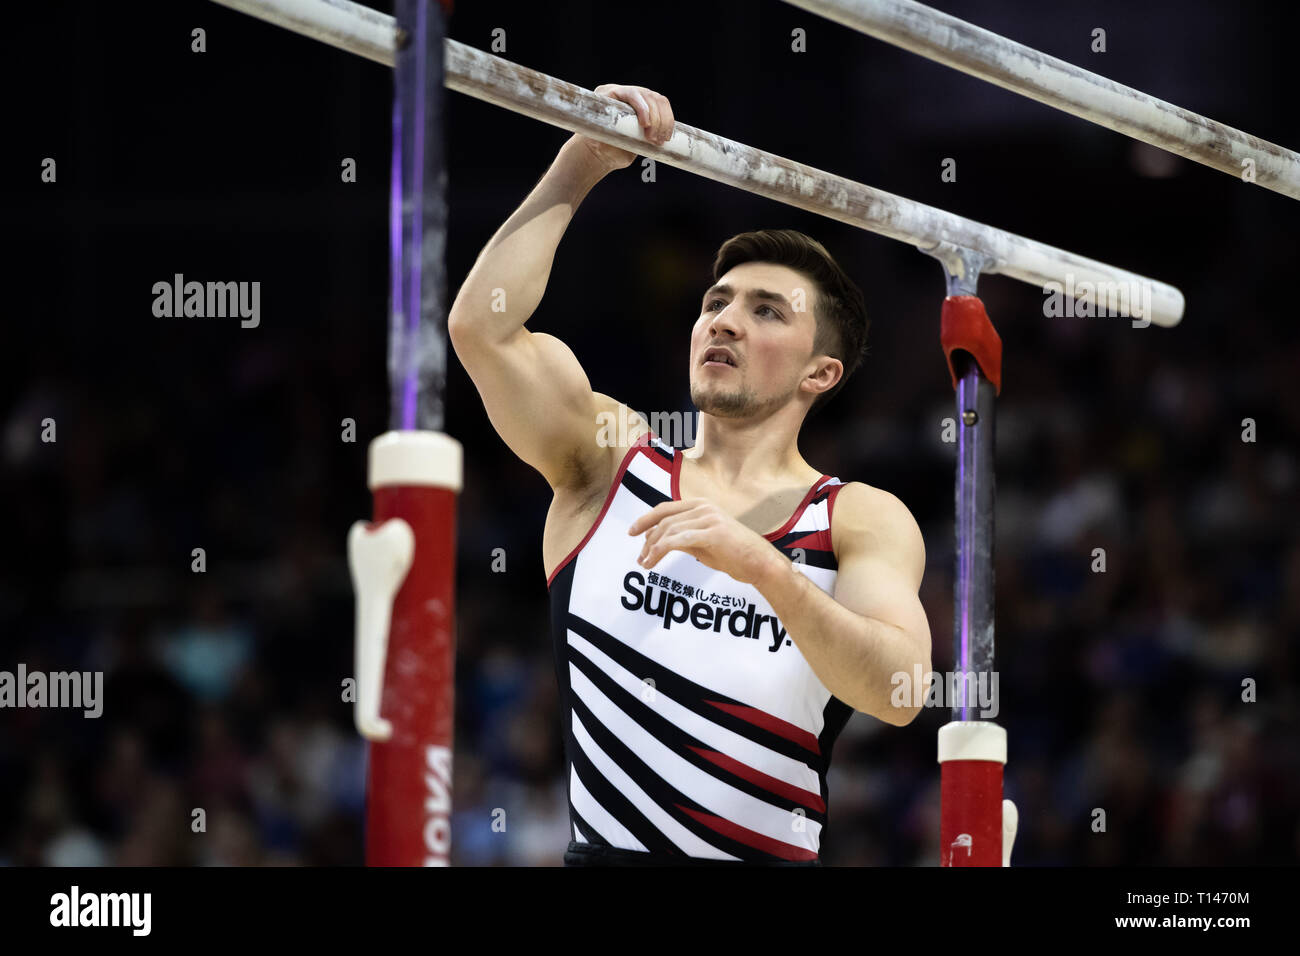 London, UK. 23rd March, 2019. Sam Oldman performs on the Parallel Bars during the Matchroom Multisport presents the 2019 Superstars of Gymnastics at The O2 Arena on Saturday, 23 March 2019. LONDON ENGLAND. Credit: Taka G Wu/Alamy News Stock Photo